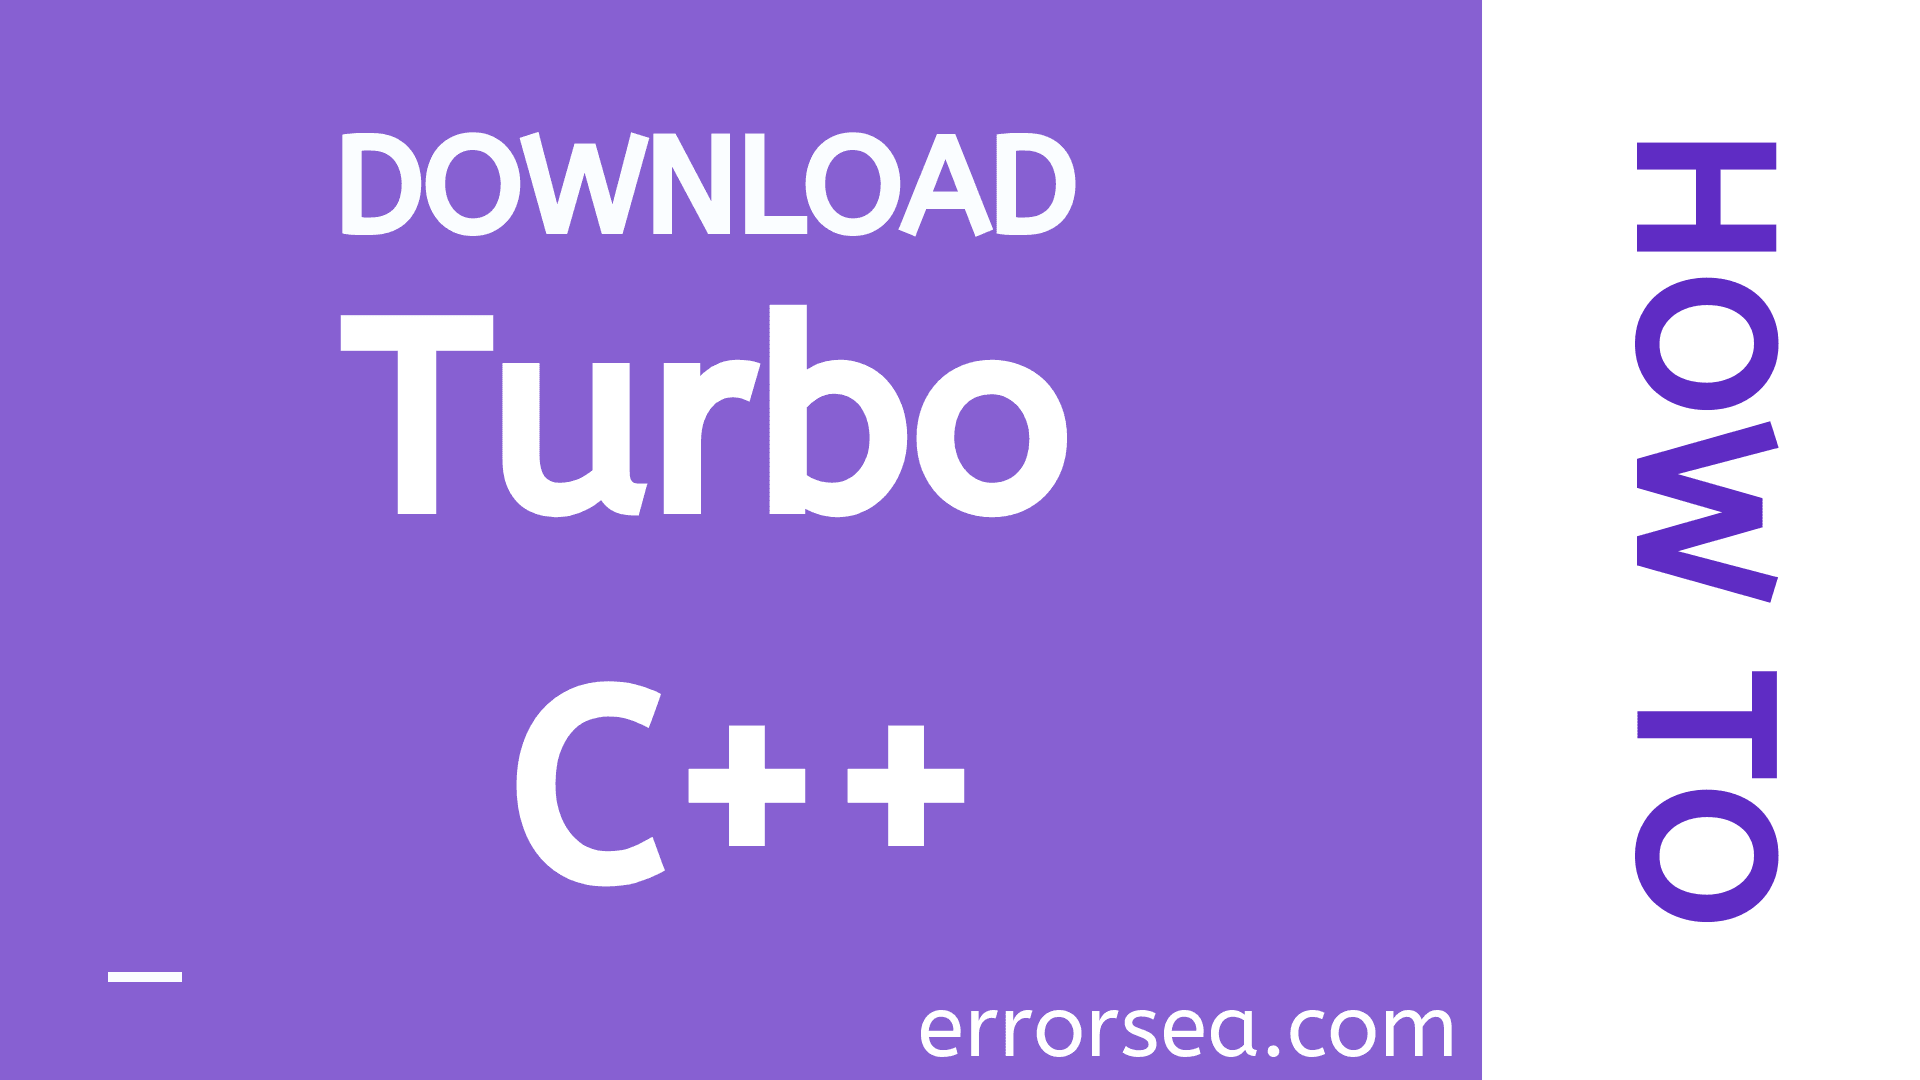 Download and Install Turbo C++ for Windows 11, 10 (Full Installation Guide)